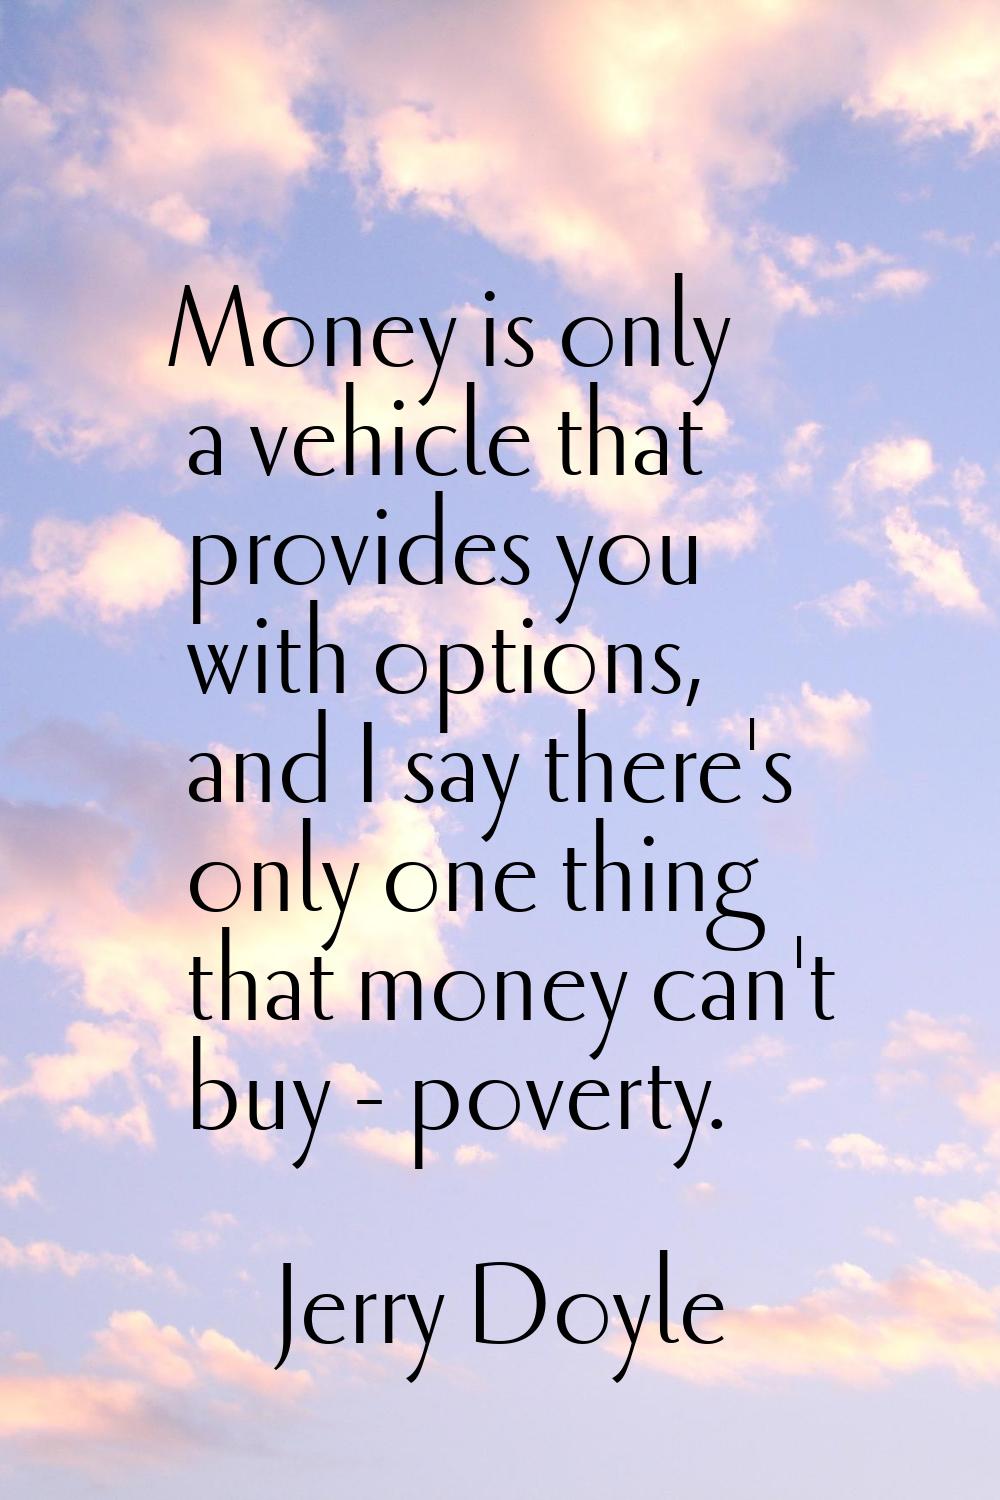 Money is only a vehicle that provides you with options, and I say there's only one thing that money